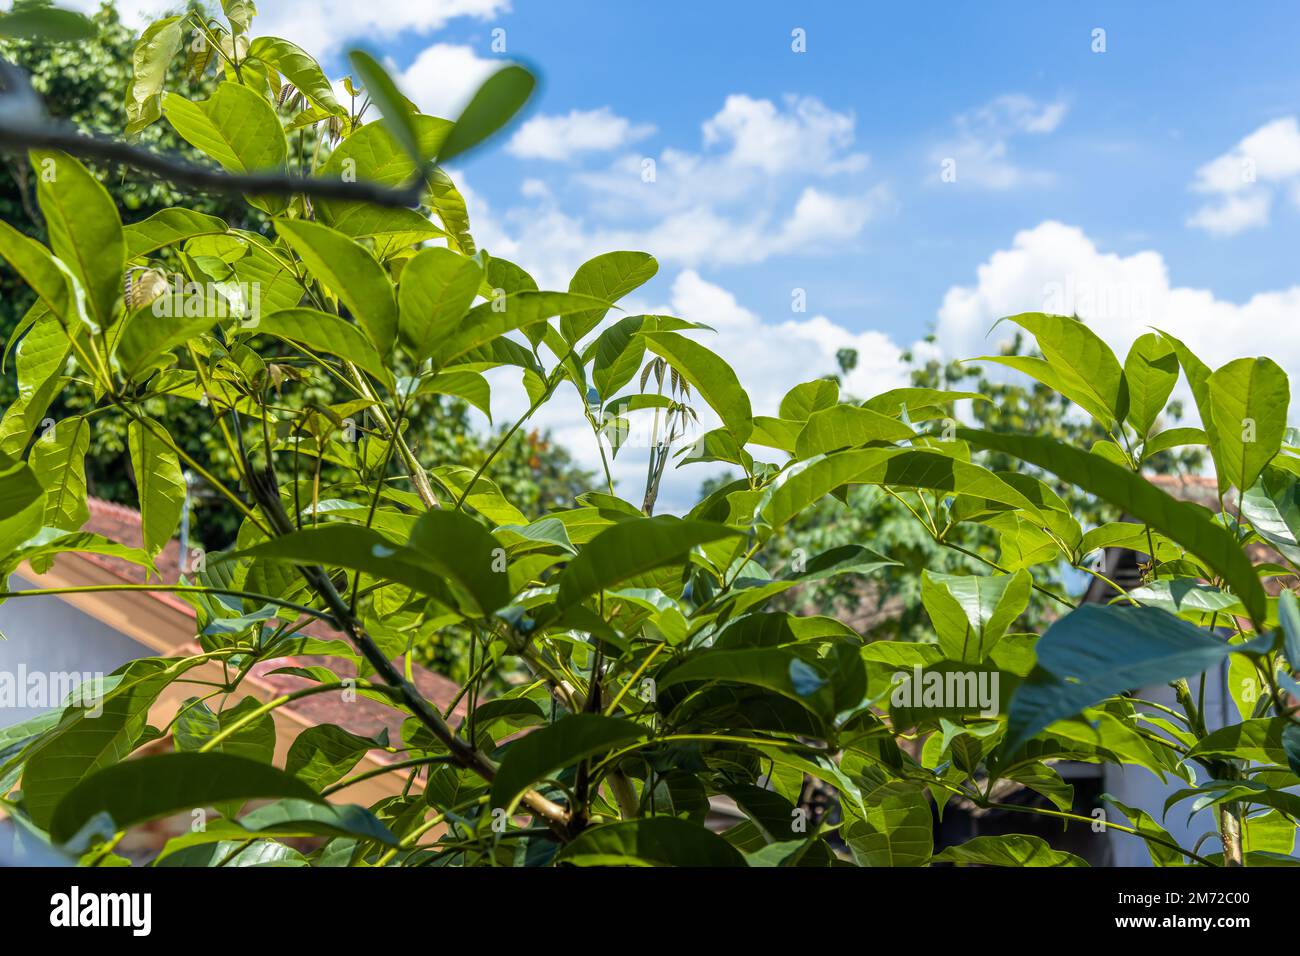 Tabebuia plant shoots with wide leaves are fresh green in the morning, bright sky background in sunny weather Stock Photo